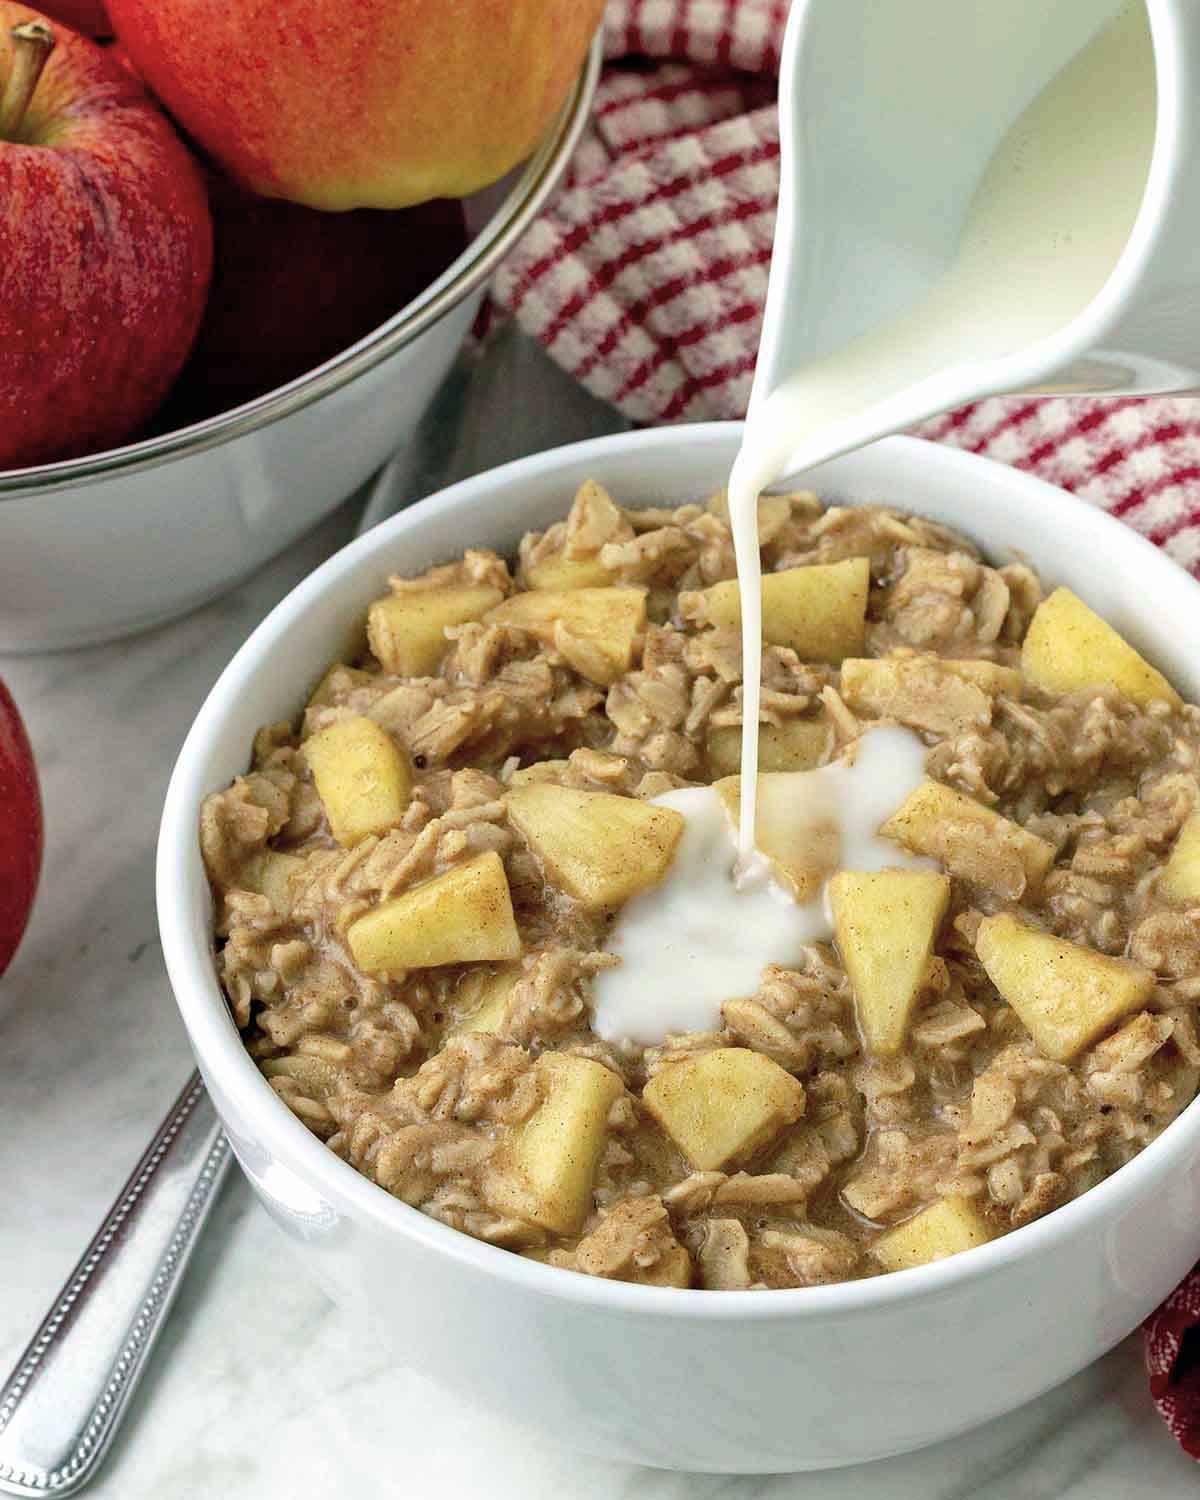 Milk being poured from a white ceramic jar onto a bowl of apple cinnamon oatmeal.